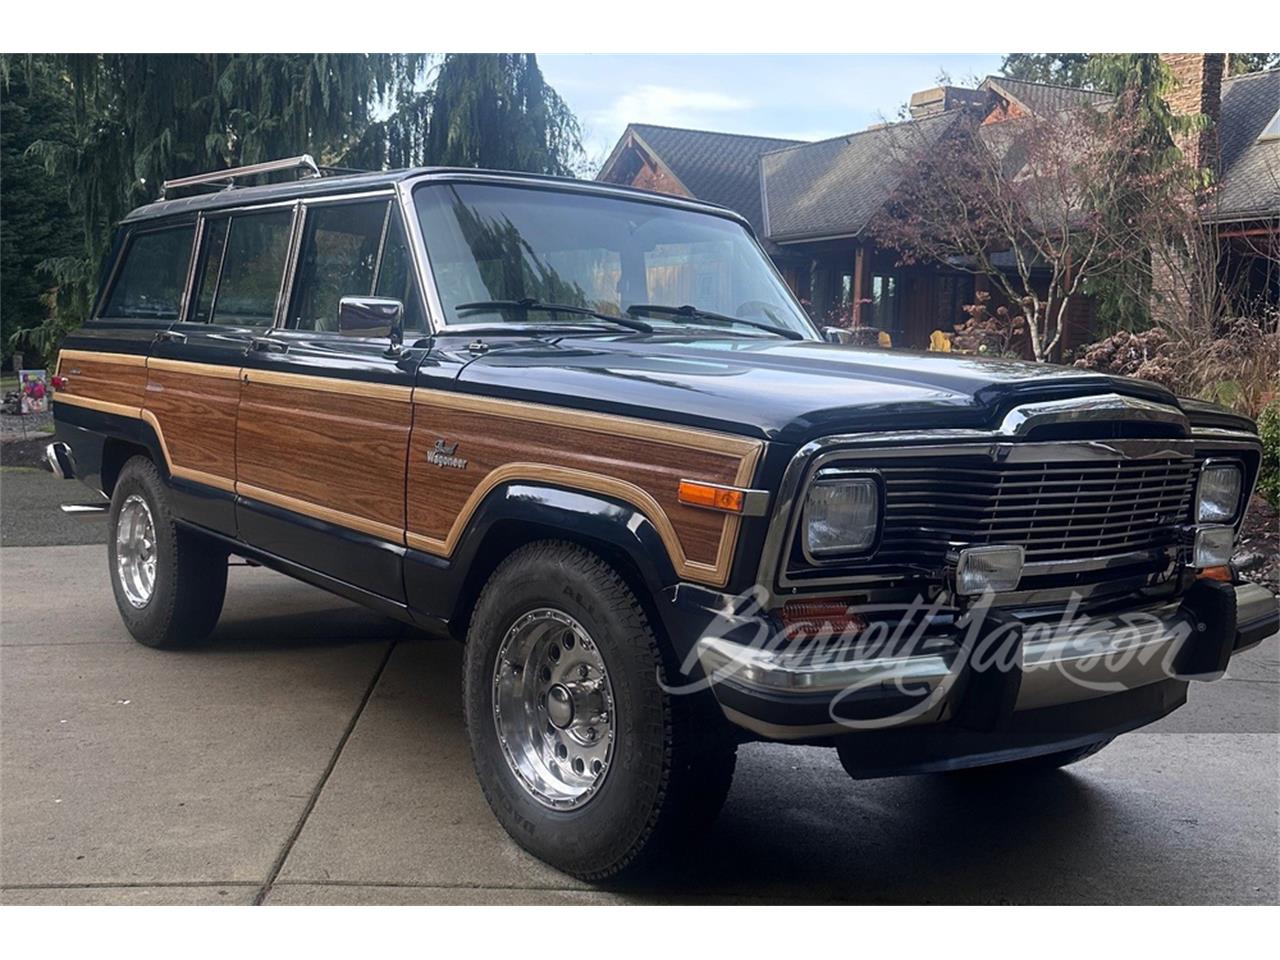 For Sale at Auction: 1984 Jeep Grand Wagoneer in Scottsdale, Arizona for sale in Scottsdale, AZ